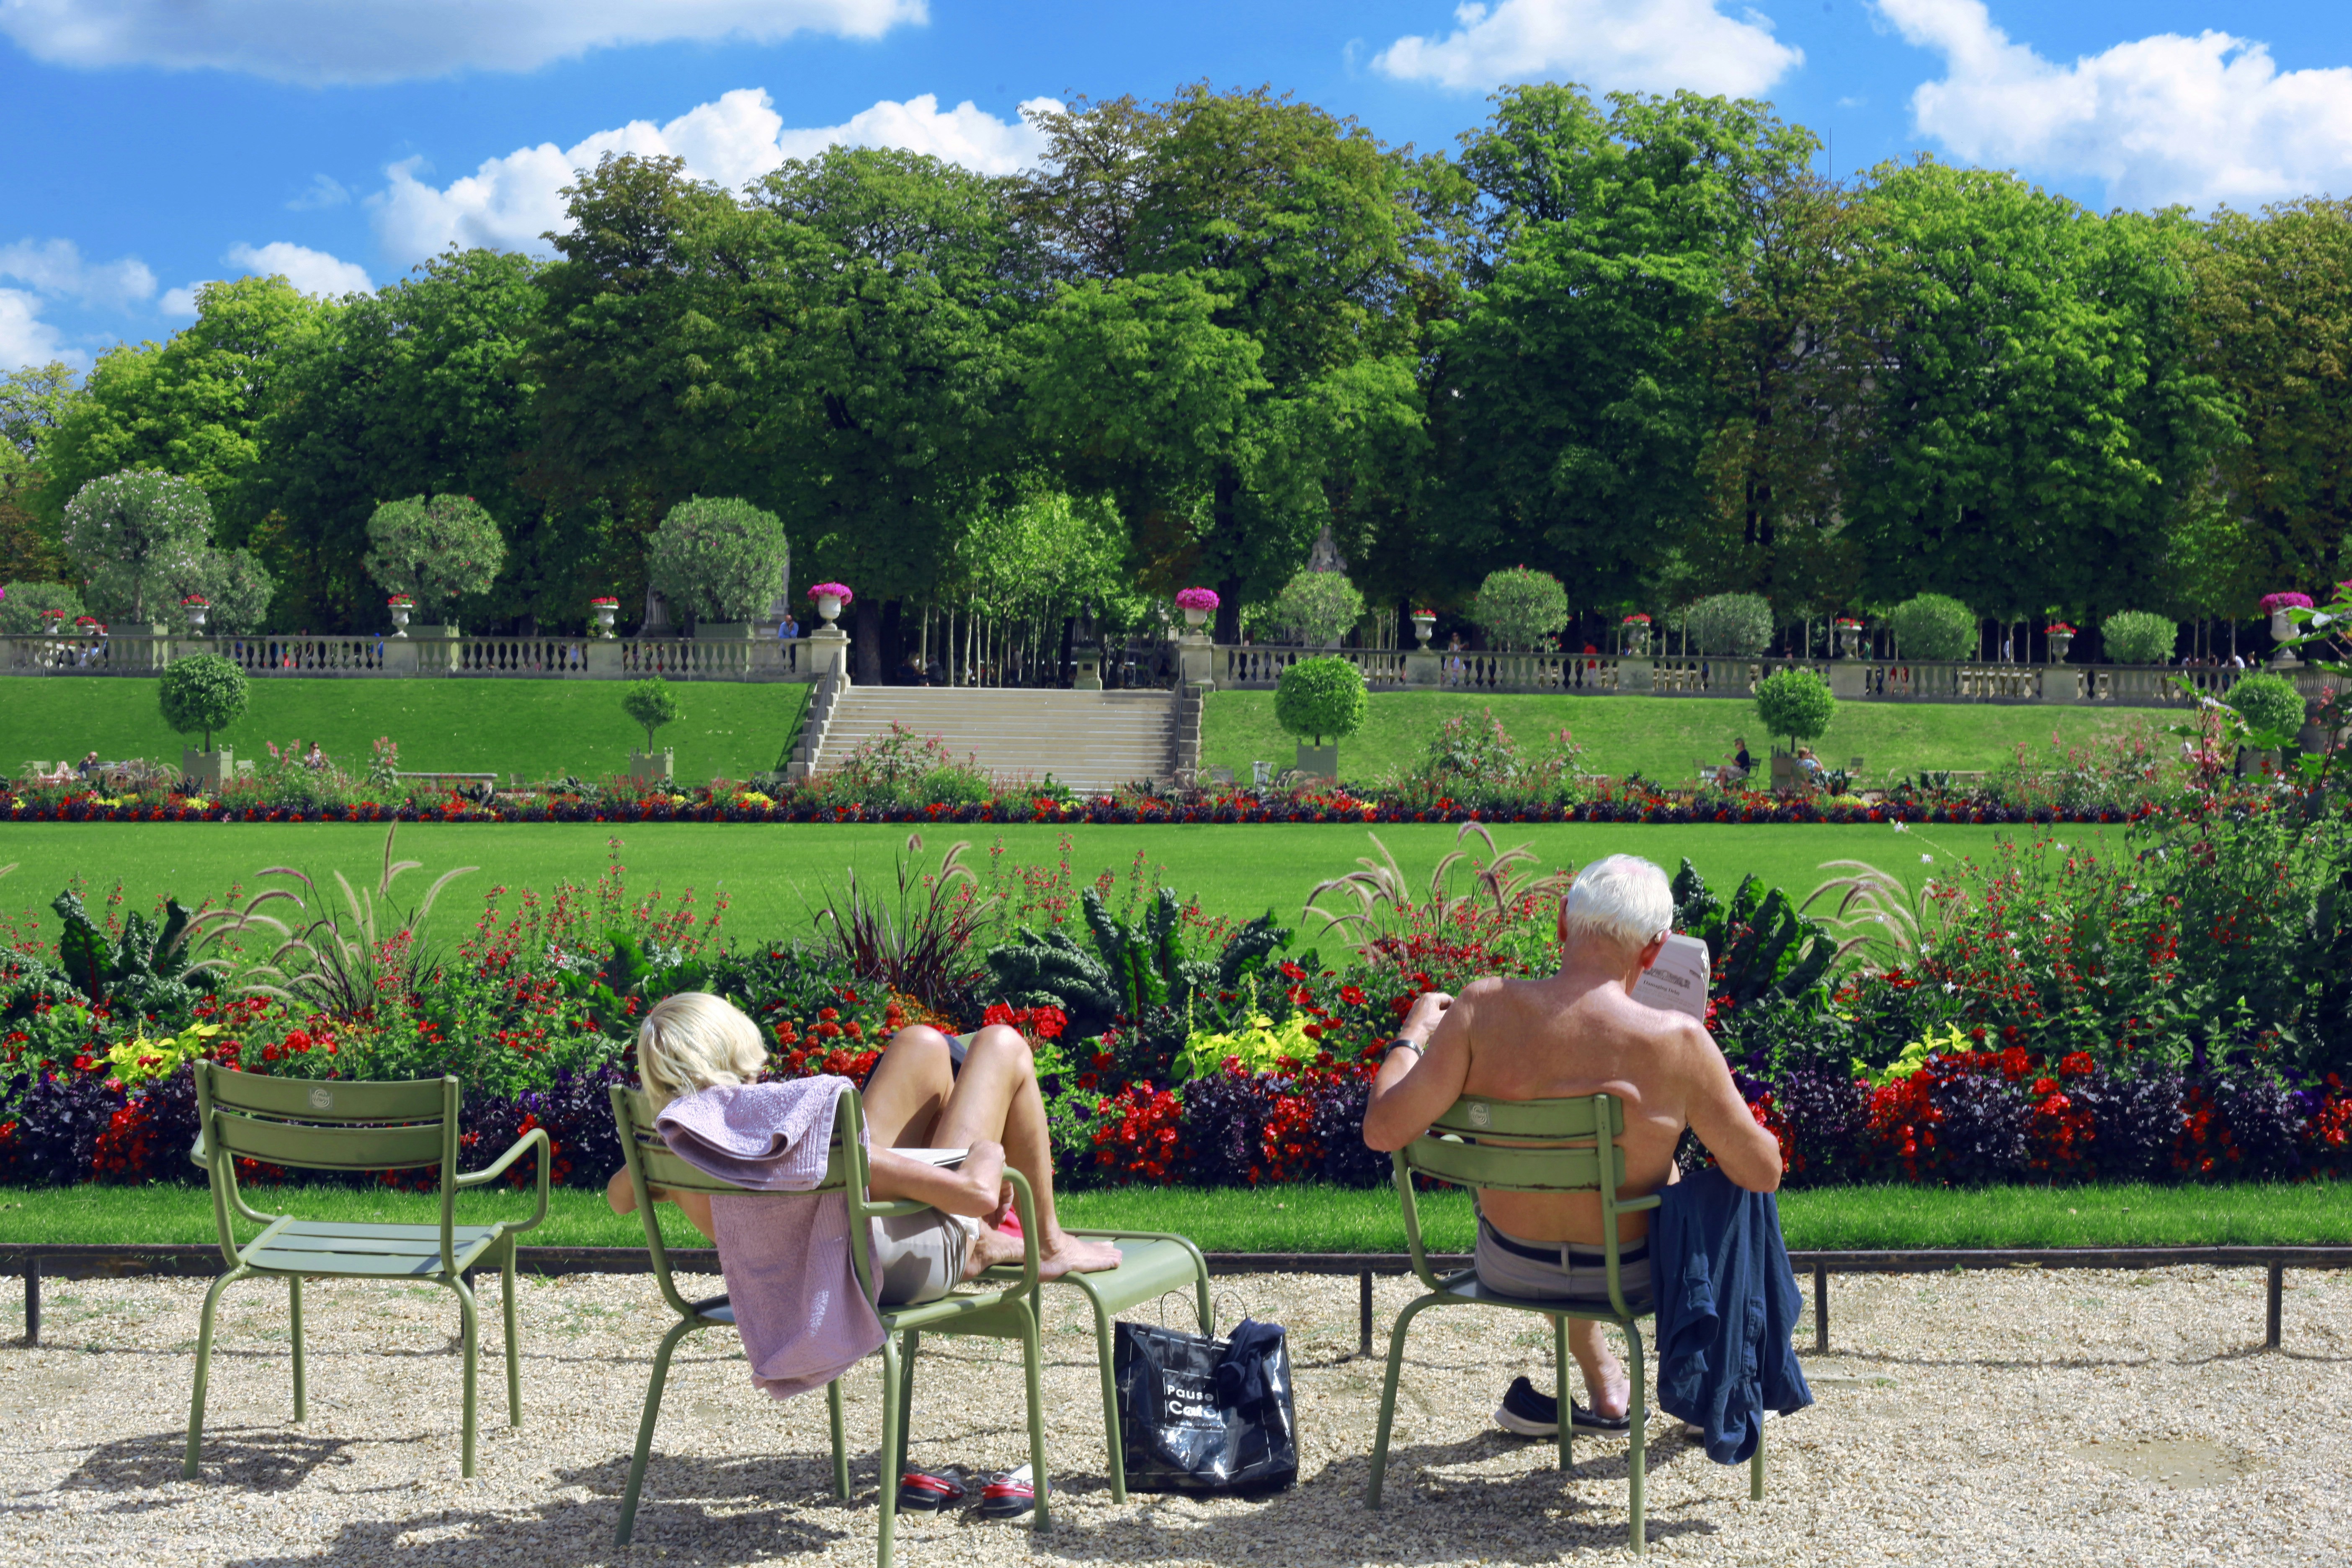 The Luxembourg Garden